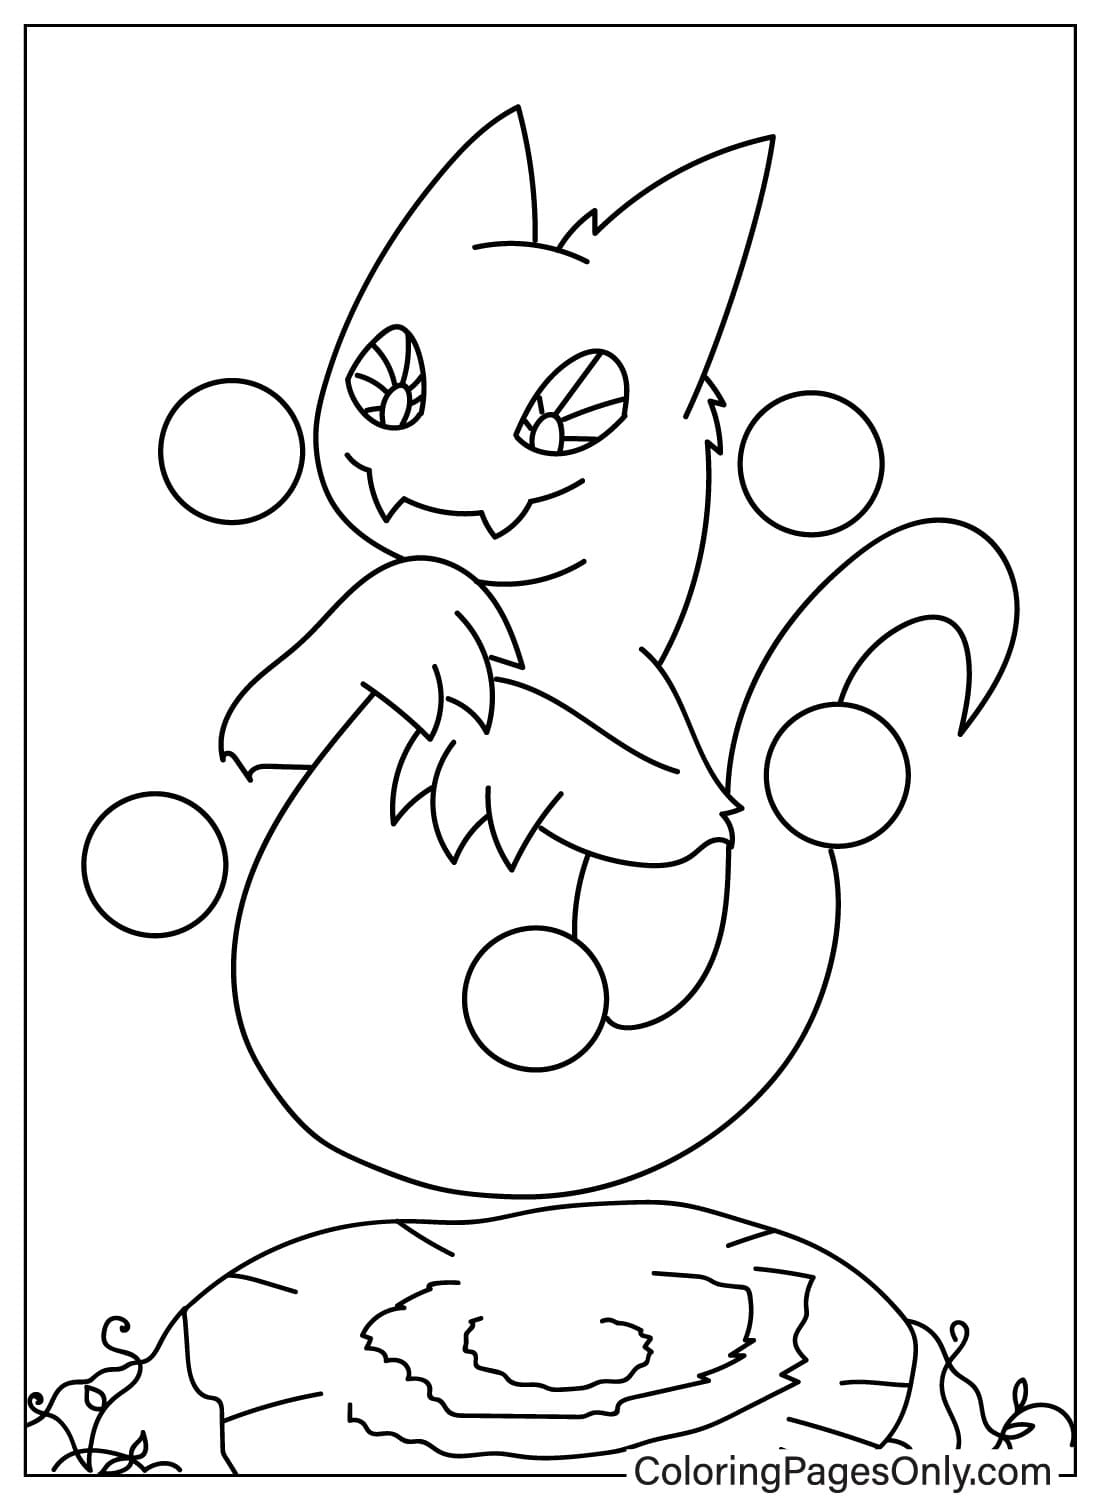 Ghazt Free Printable Coloring Page from Ghazt